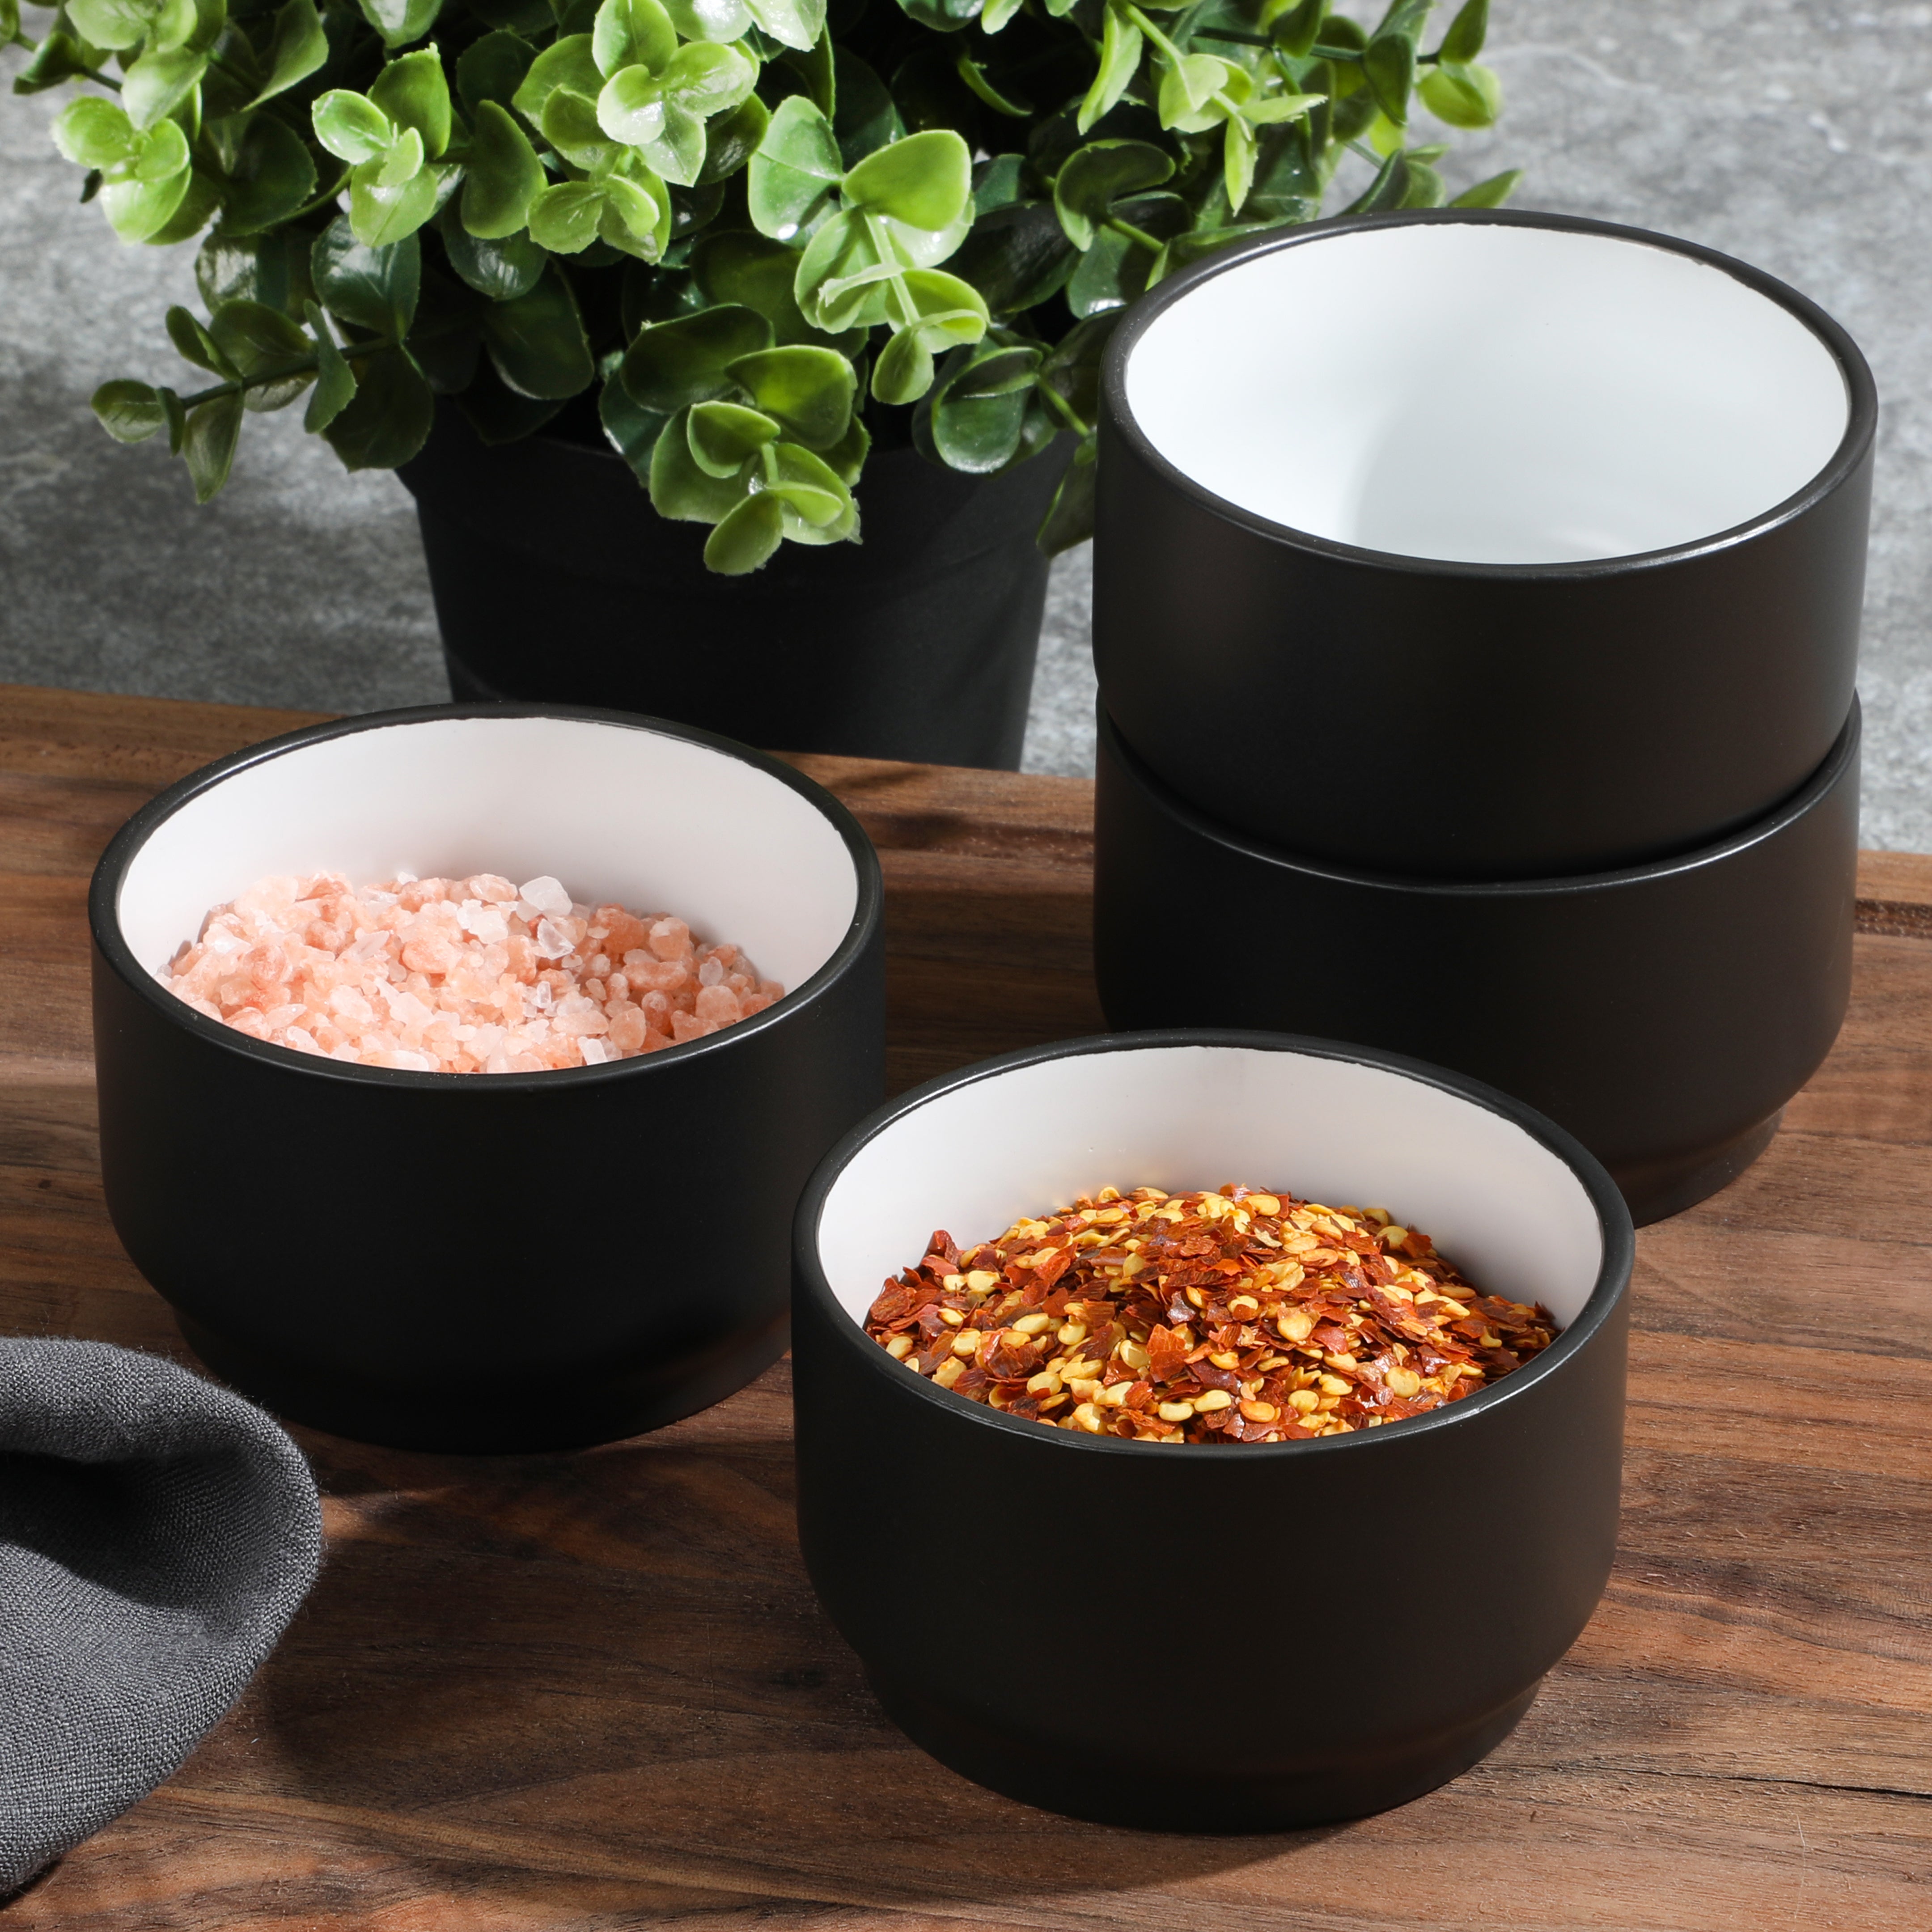 Babish Glass Mixing Bowl Set with Lids, 3-Piece